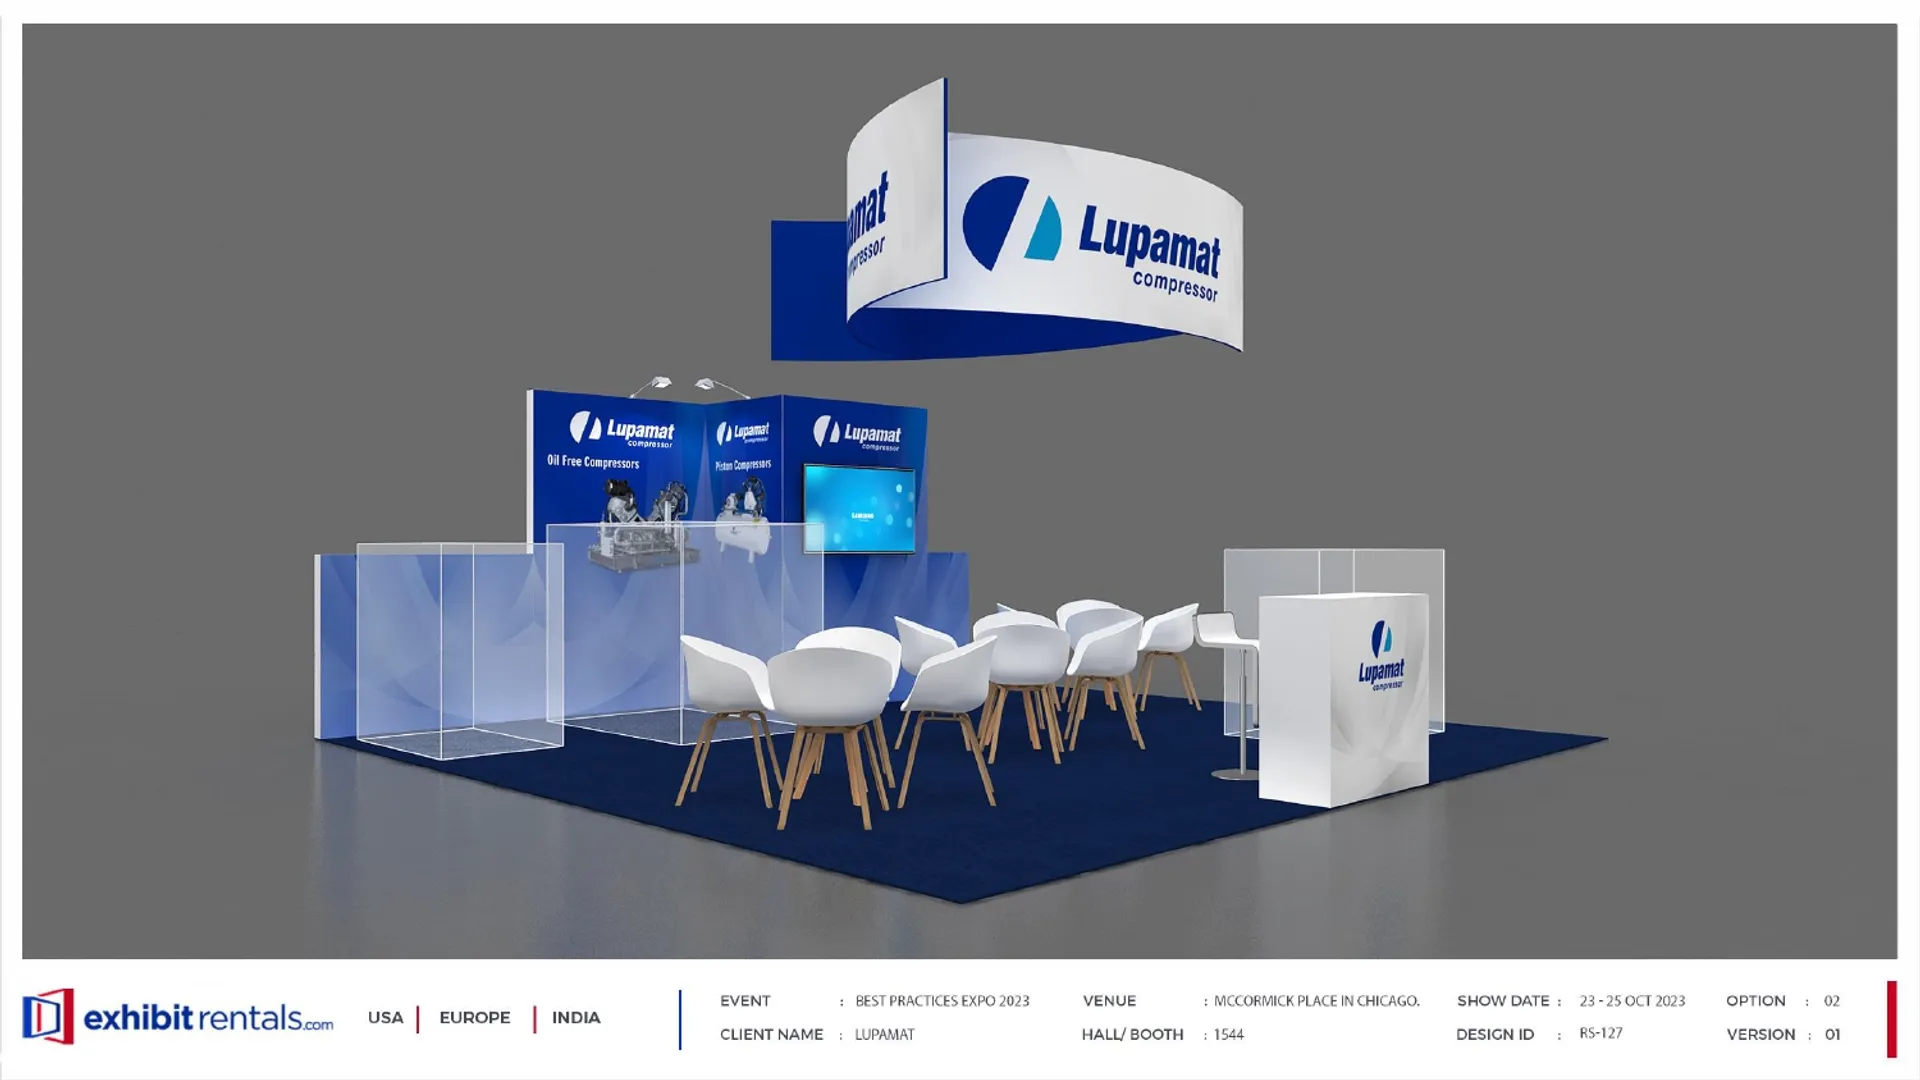 booth-design-projects/Exhibit-Rentals/2024-04-18-40x40-PENINSULA-Project-99/2.1_Lupamat_Best practices expo_ER design proposal-14_page-0001-y69v95.jpg